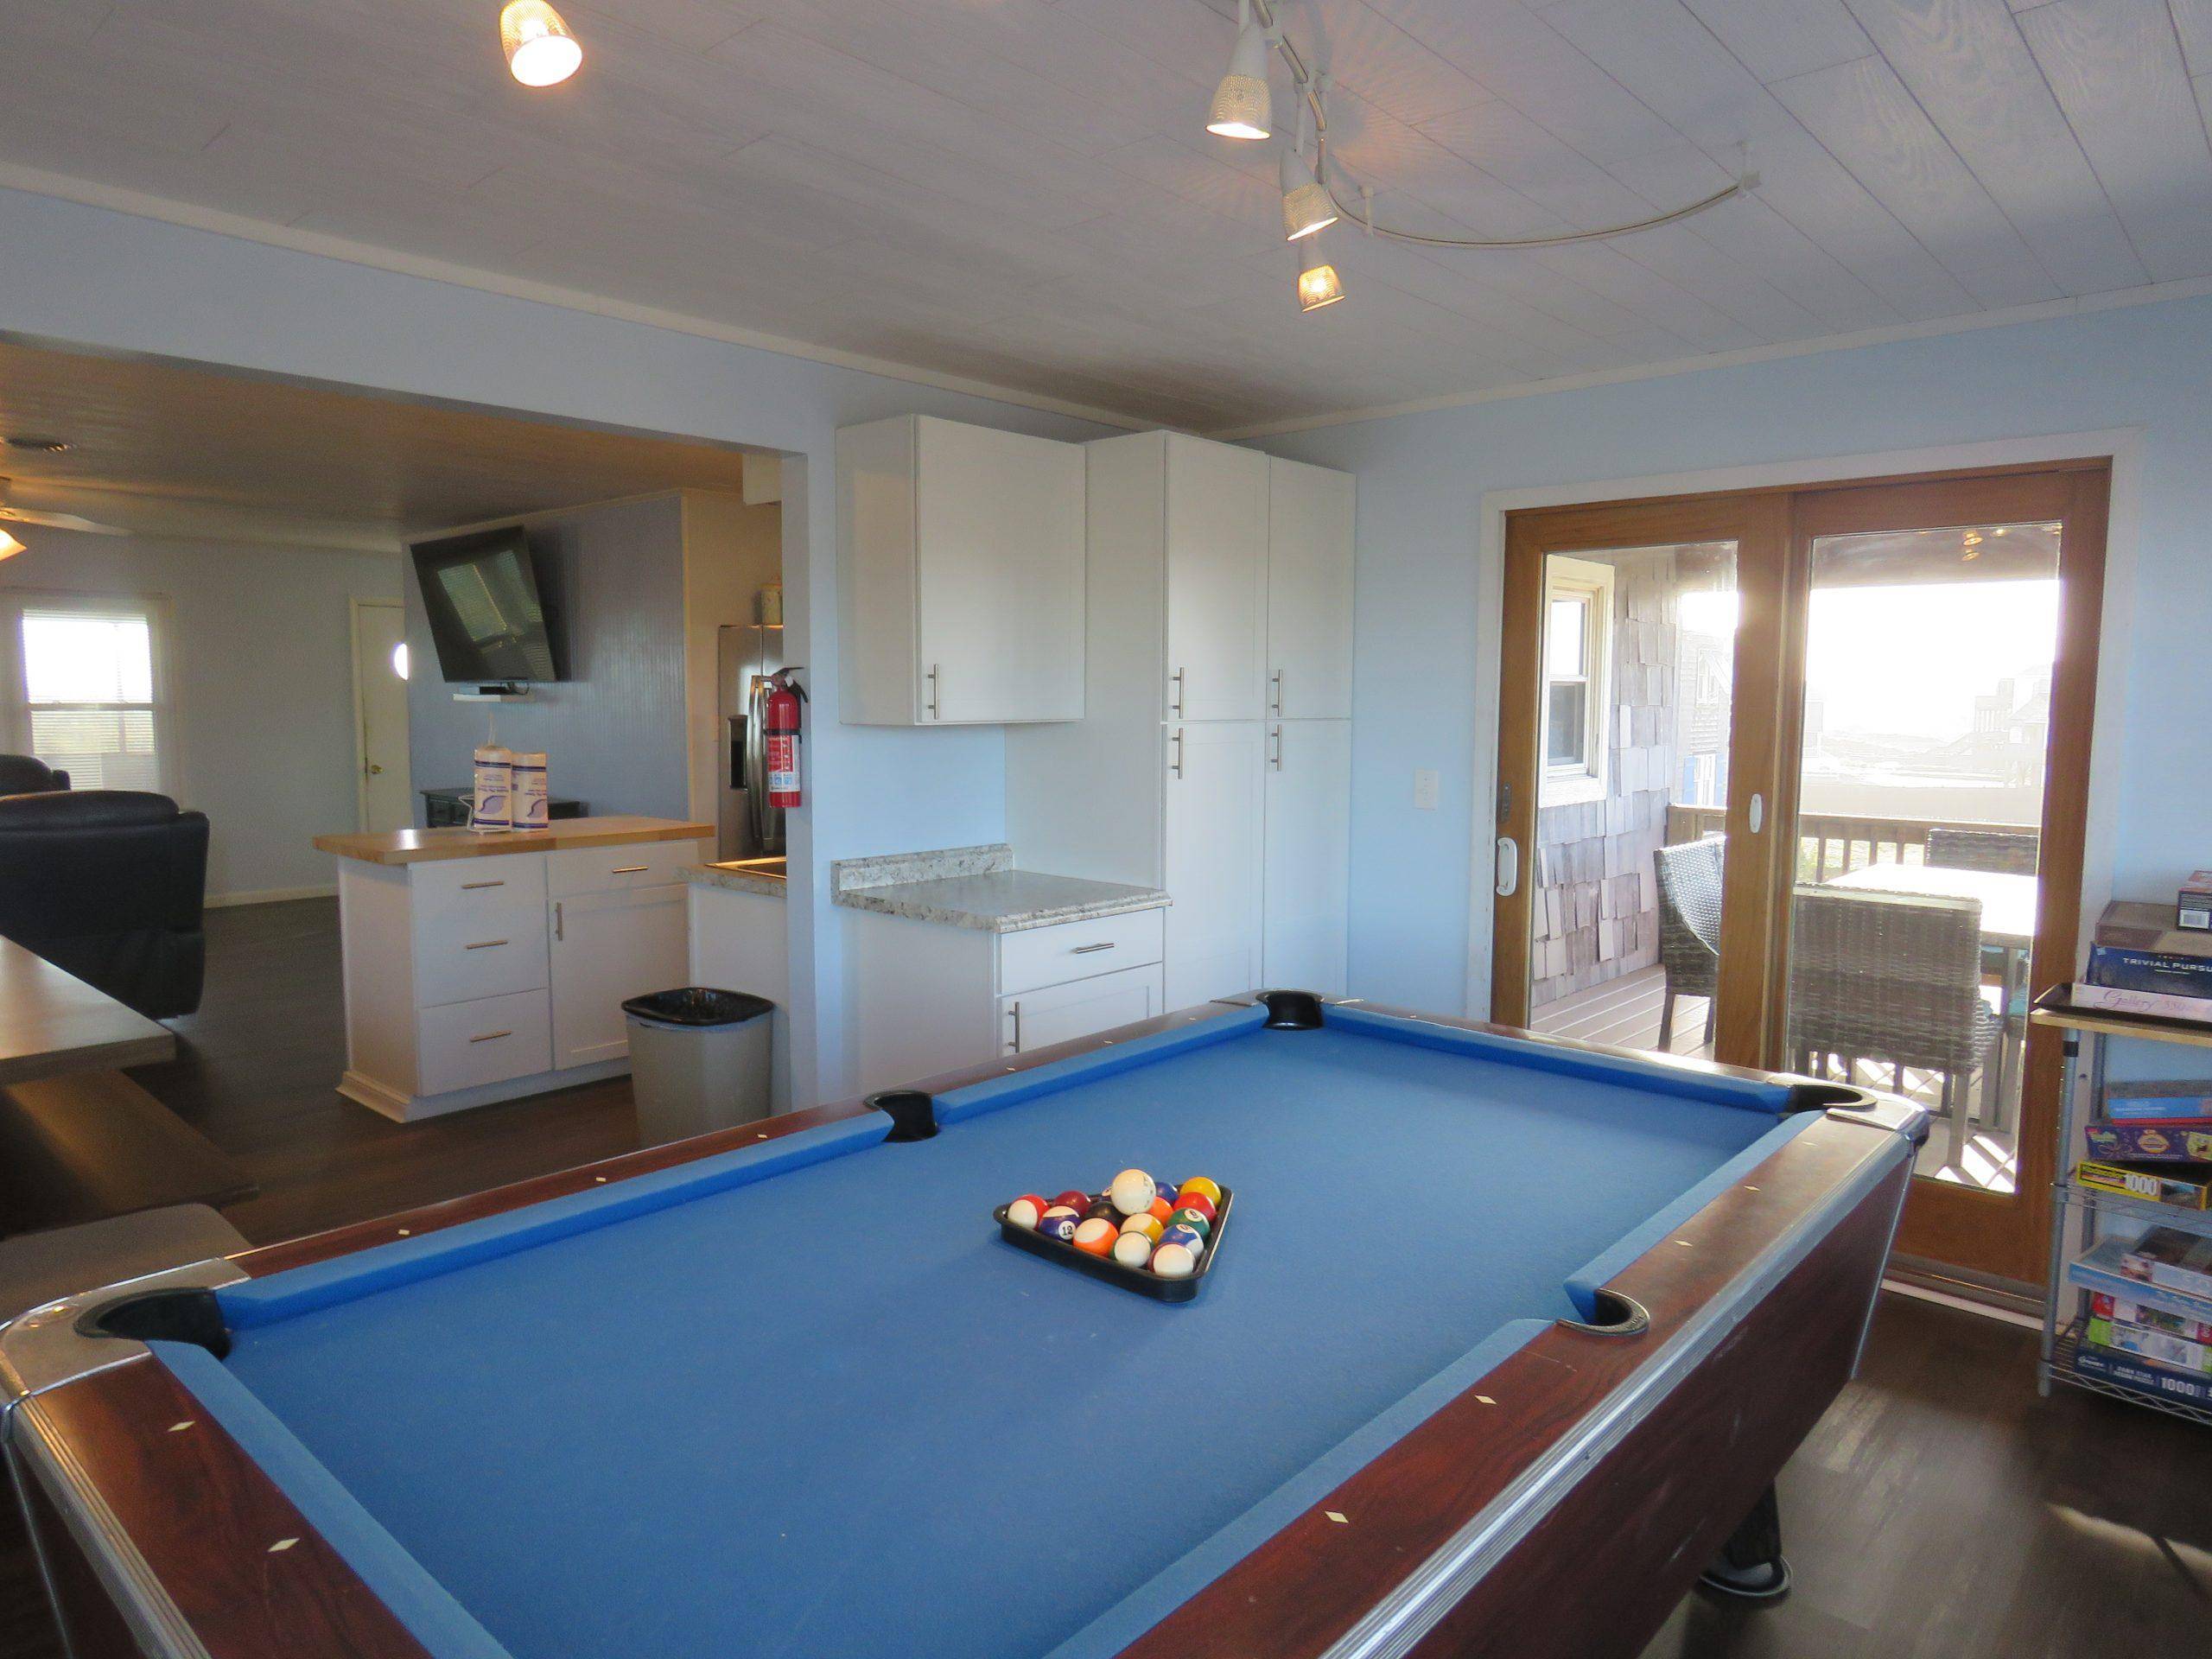 Pool table and game room